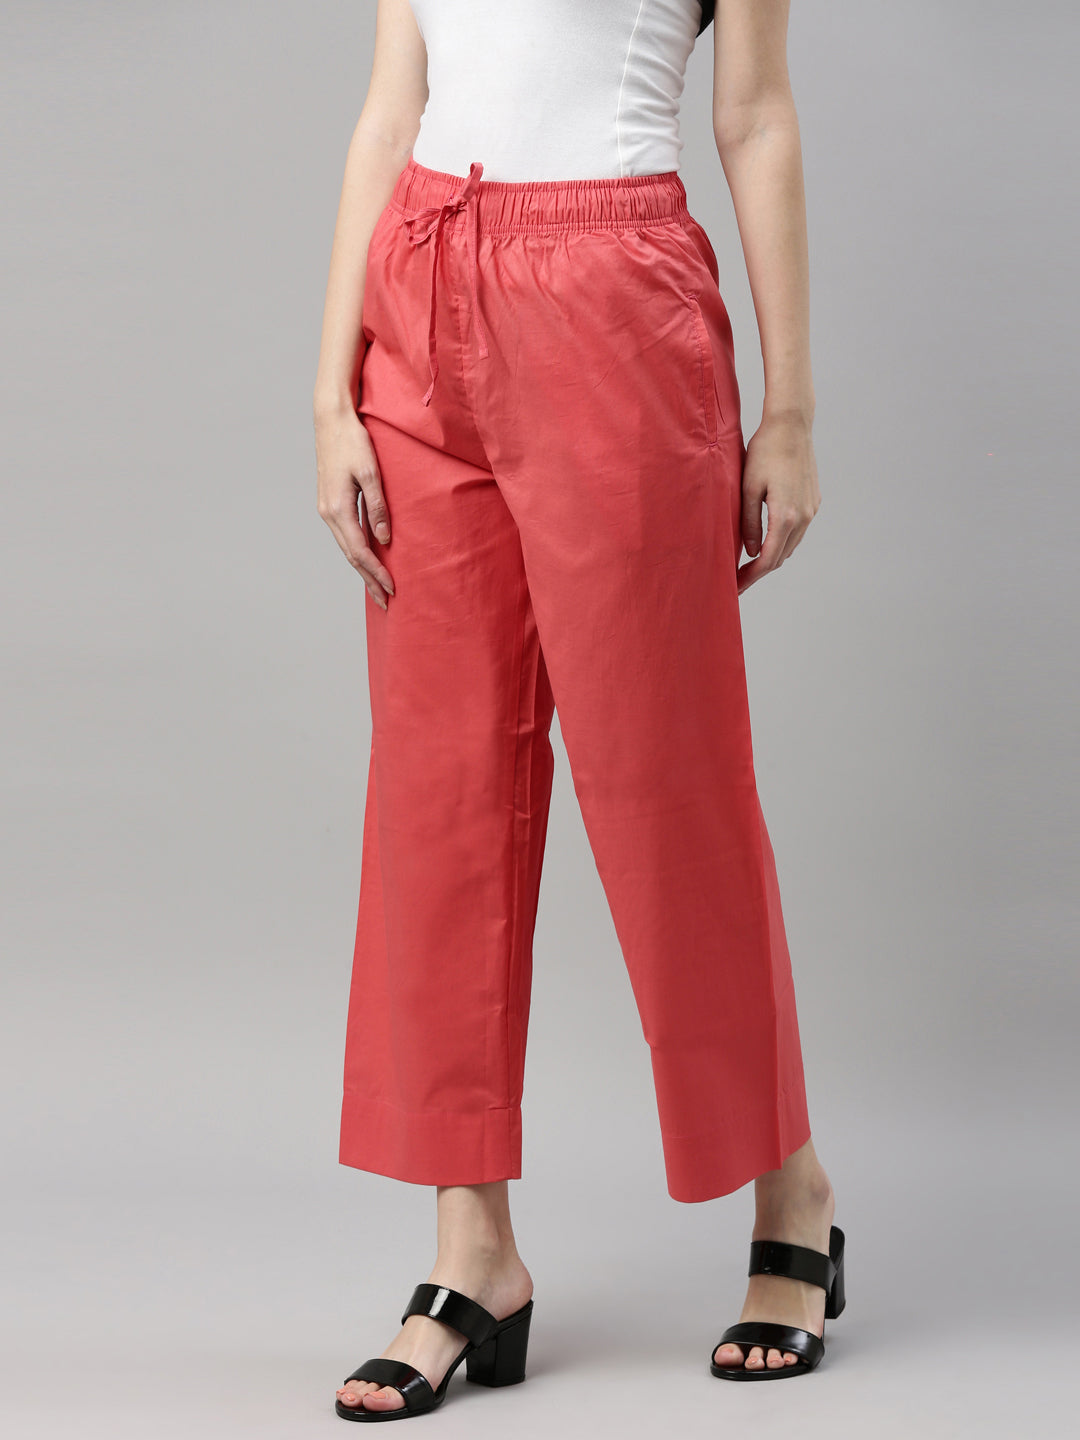 Here We Go Oatmeal Ankle Tie Linen Blend Pants FINAL SALE – Pink Lily